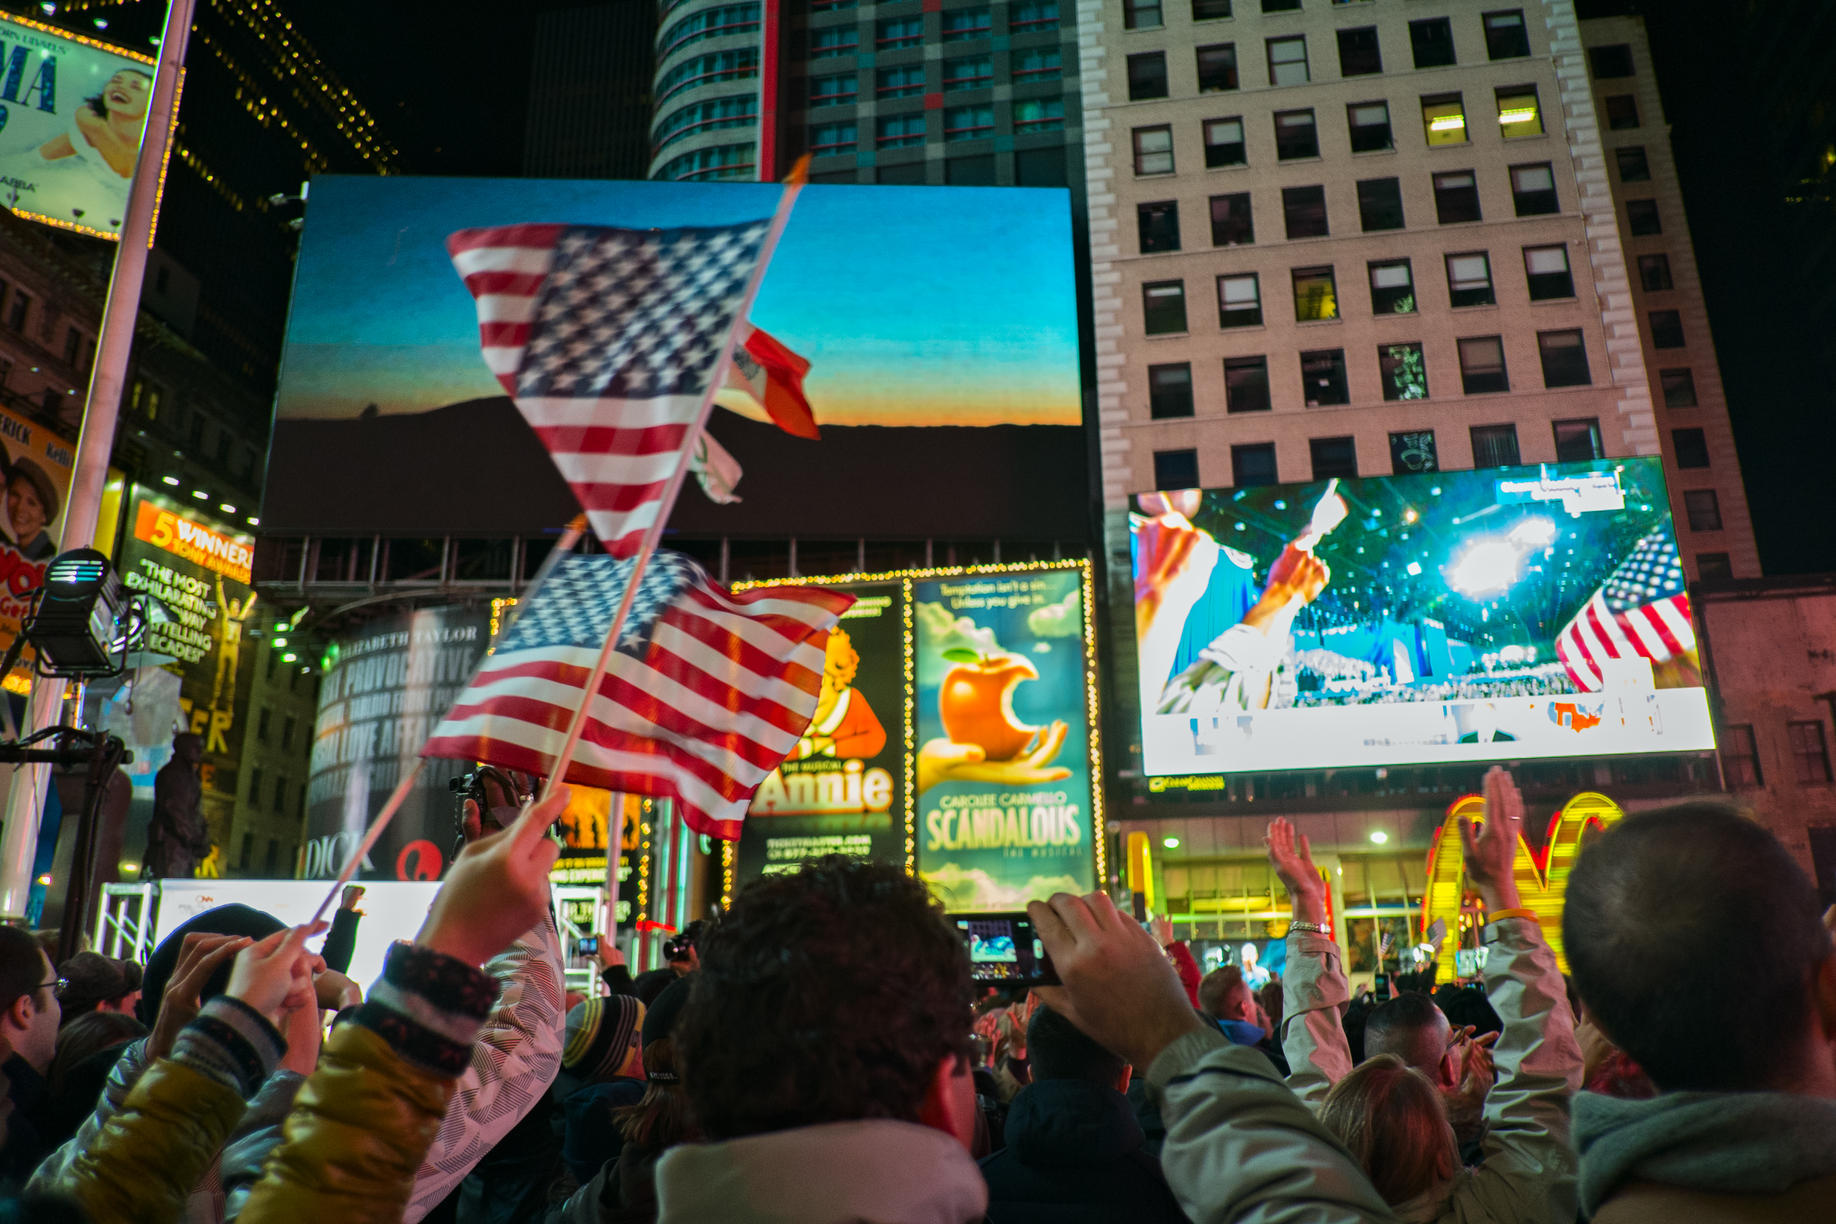 November 7, 2012, New York, NY, US. Crowd in Times Square awaits President Barack Obama's re-election victory speech to be played on giant TV screens.